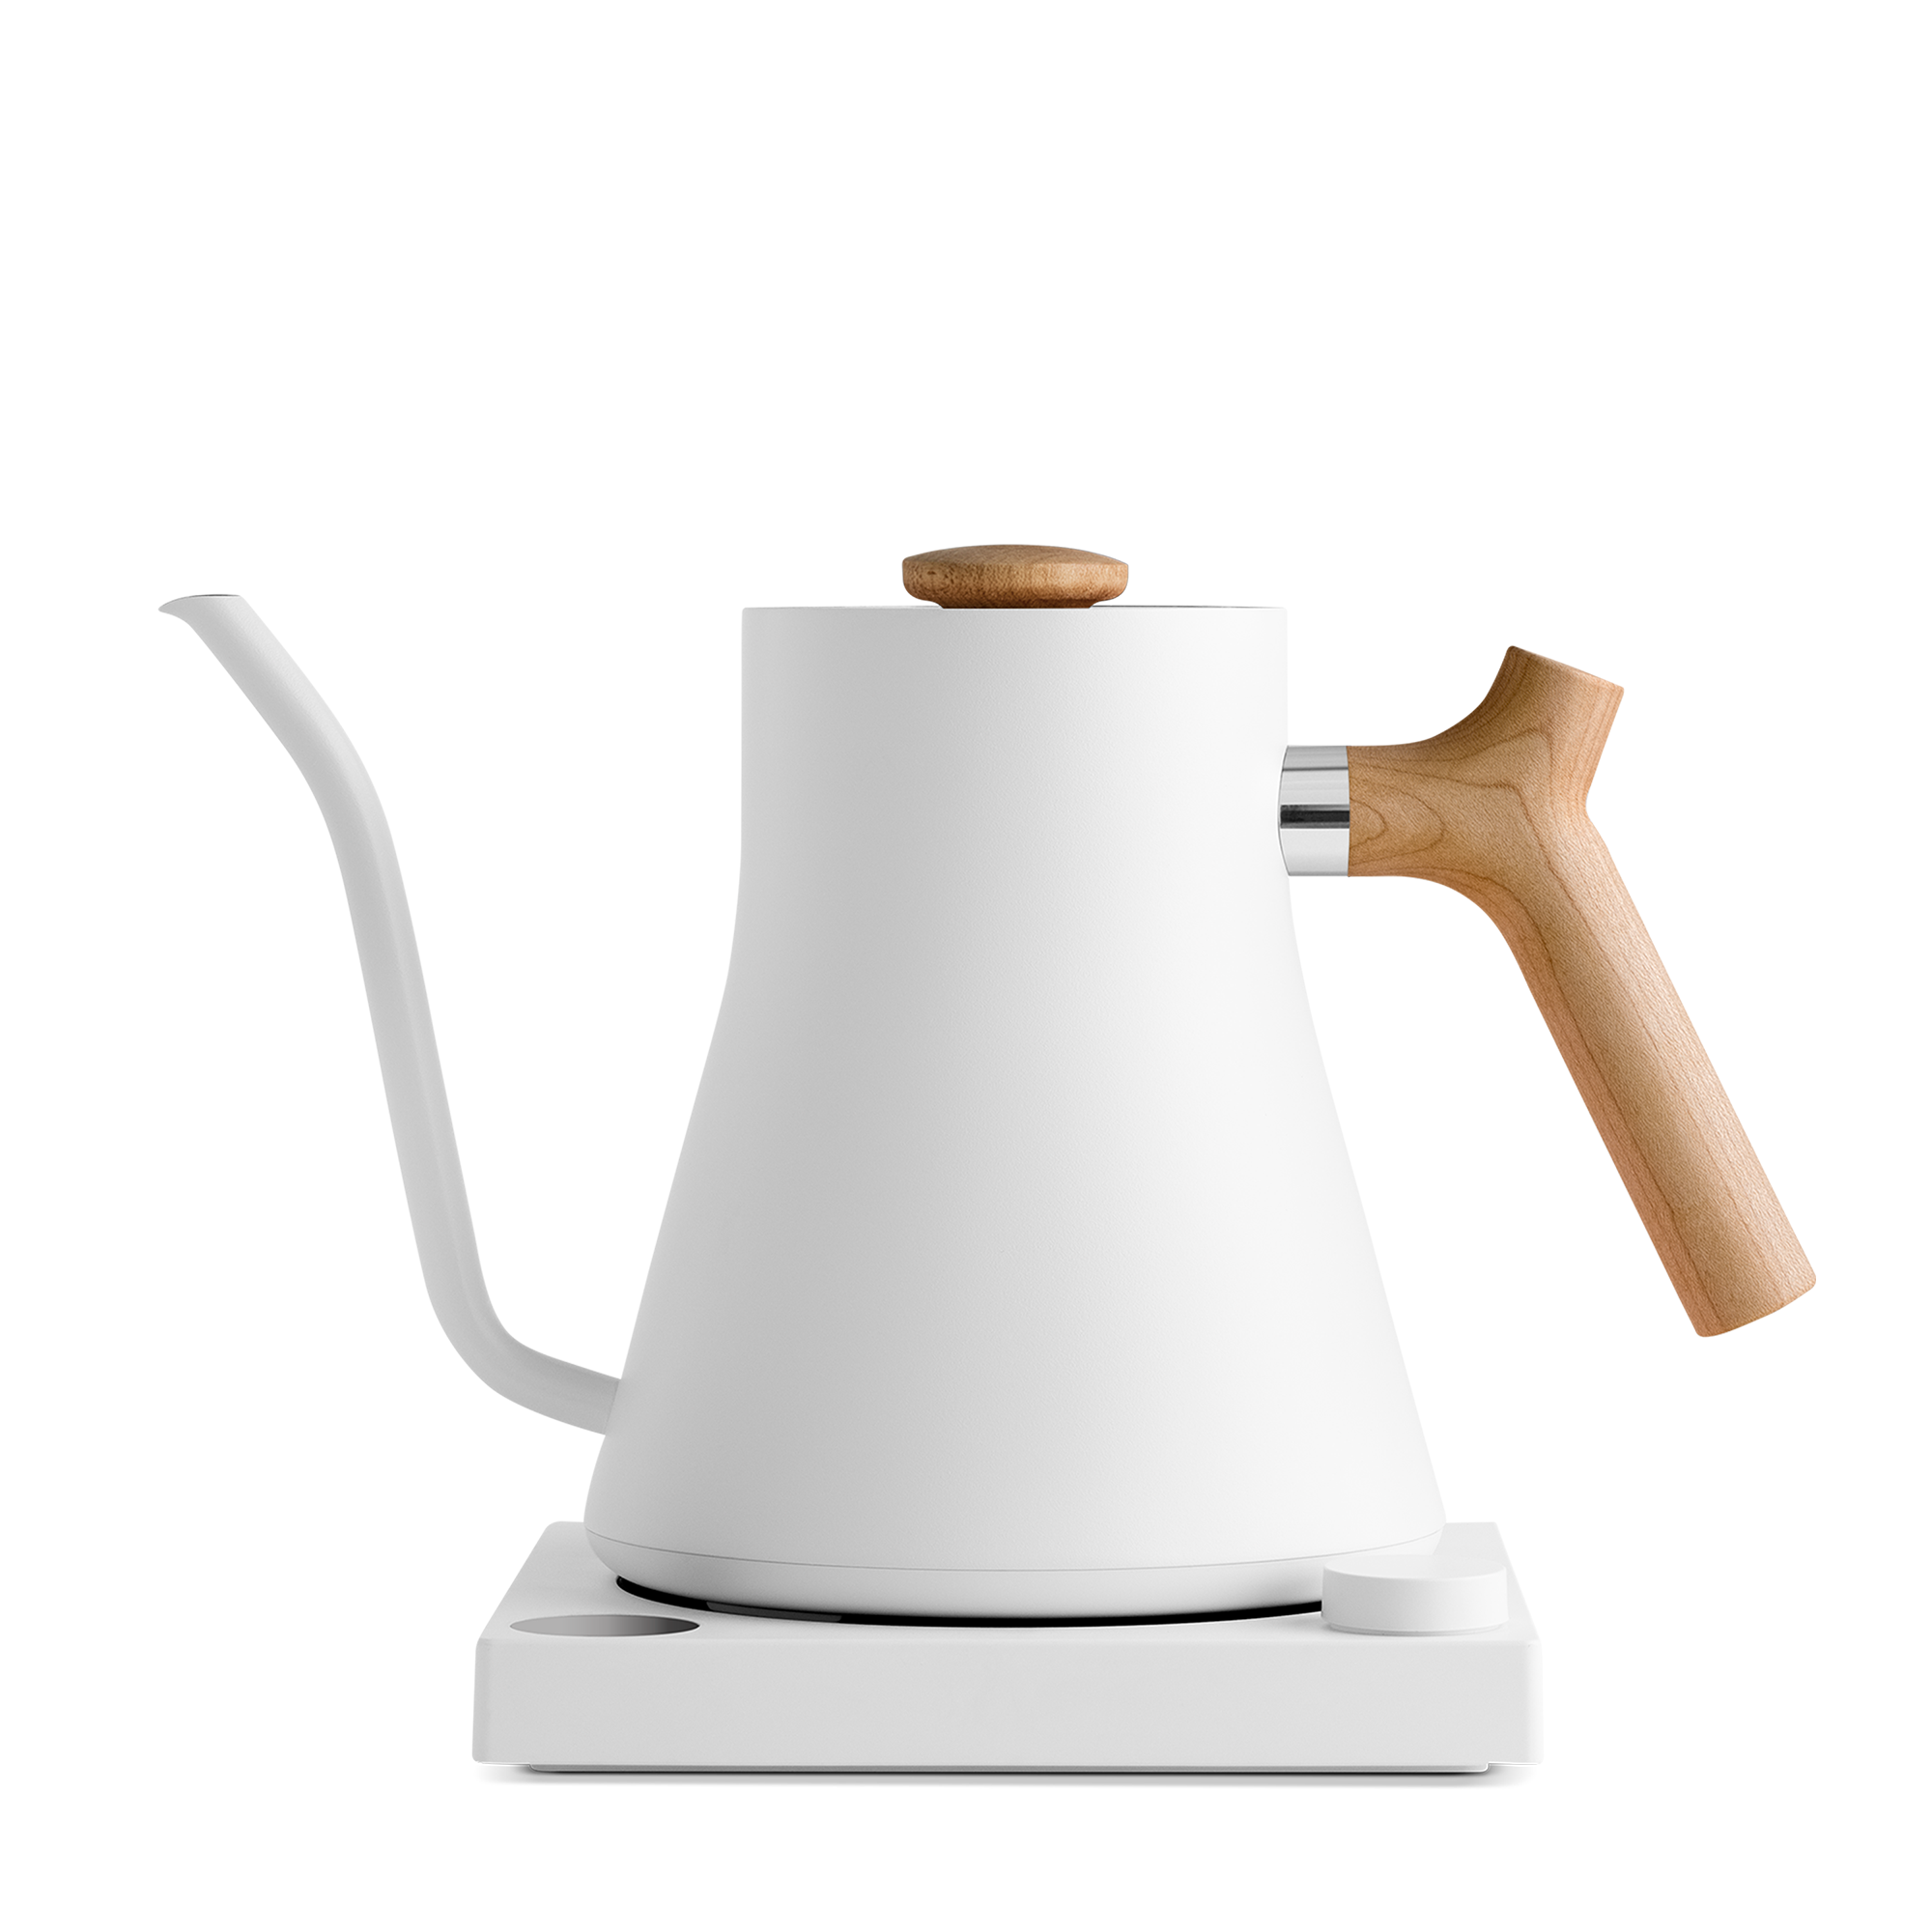 Fellow Stagg EKG Electric Kettle Review: A+ Temperature Control